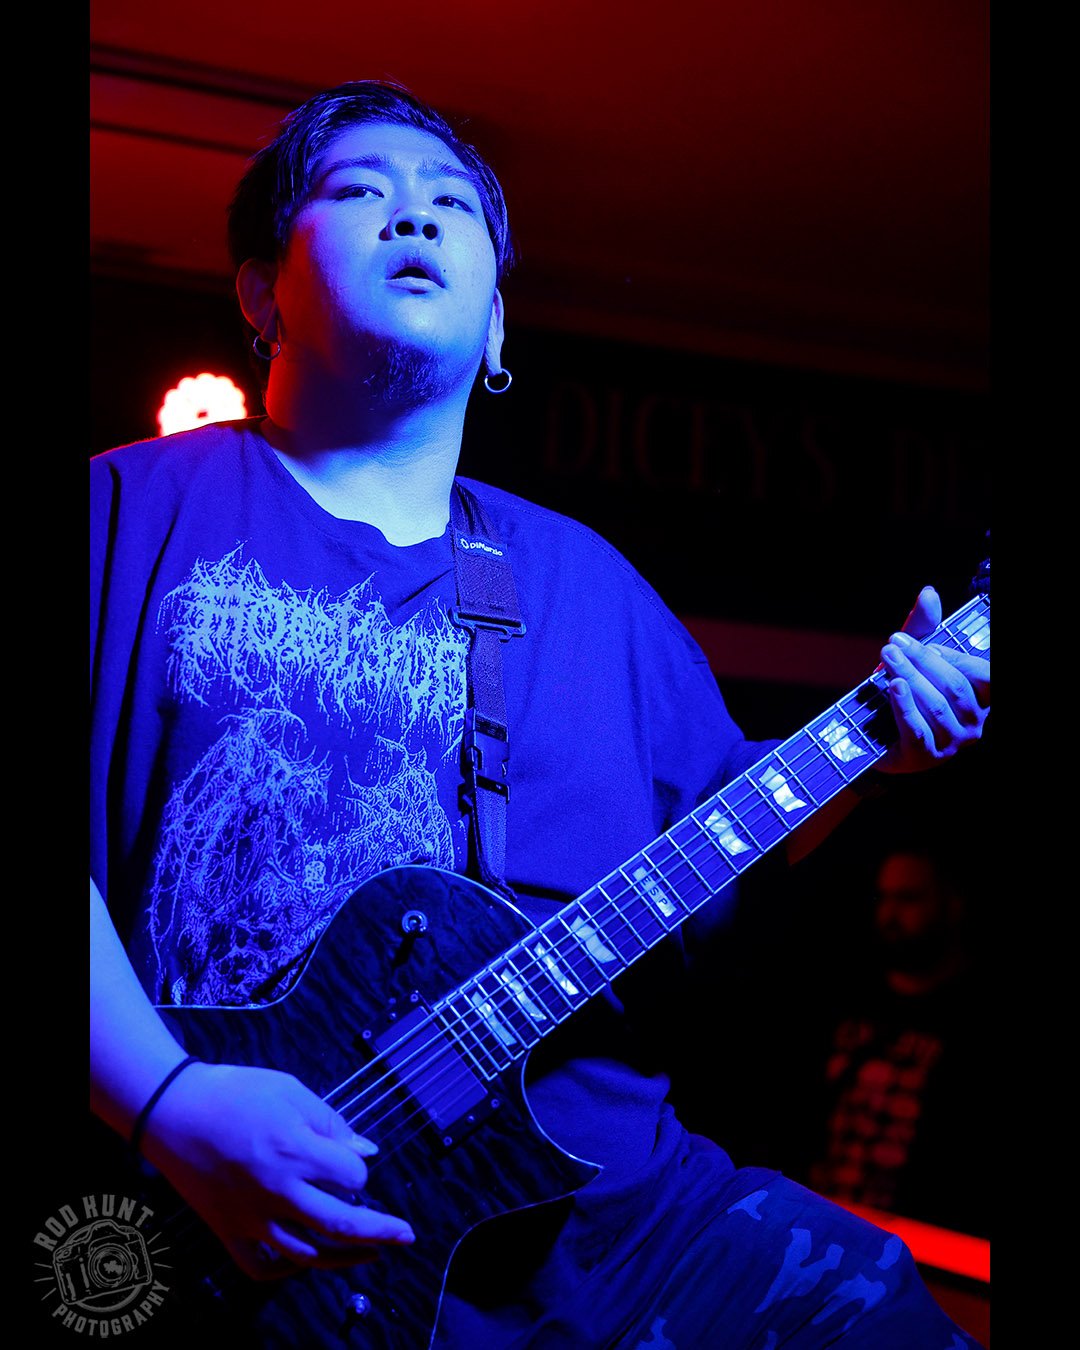 Tokyo's Kruelty bulldozed audiences on their Australian tour with @gatecreeper 
last month, delivering a sound that hit like Hatebreed playing death metal 🤘👊🤘
The dates included this show at Dicey's in Wollongong on a Tuesday night. 
 
📷 shot for